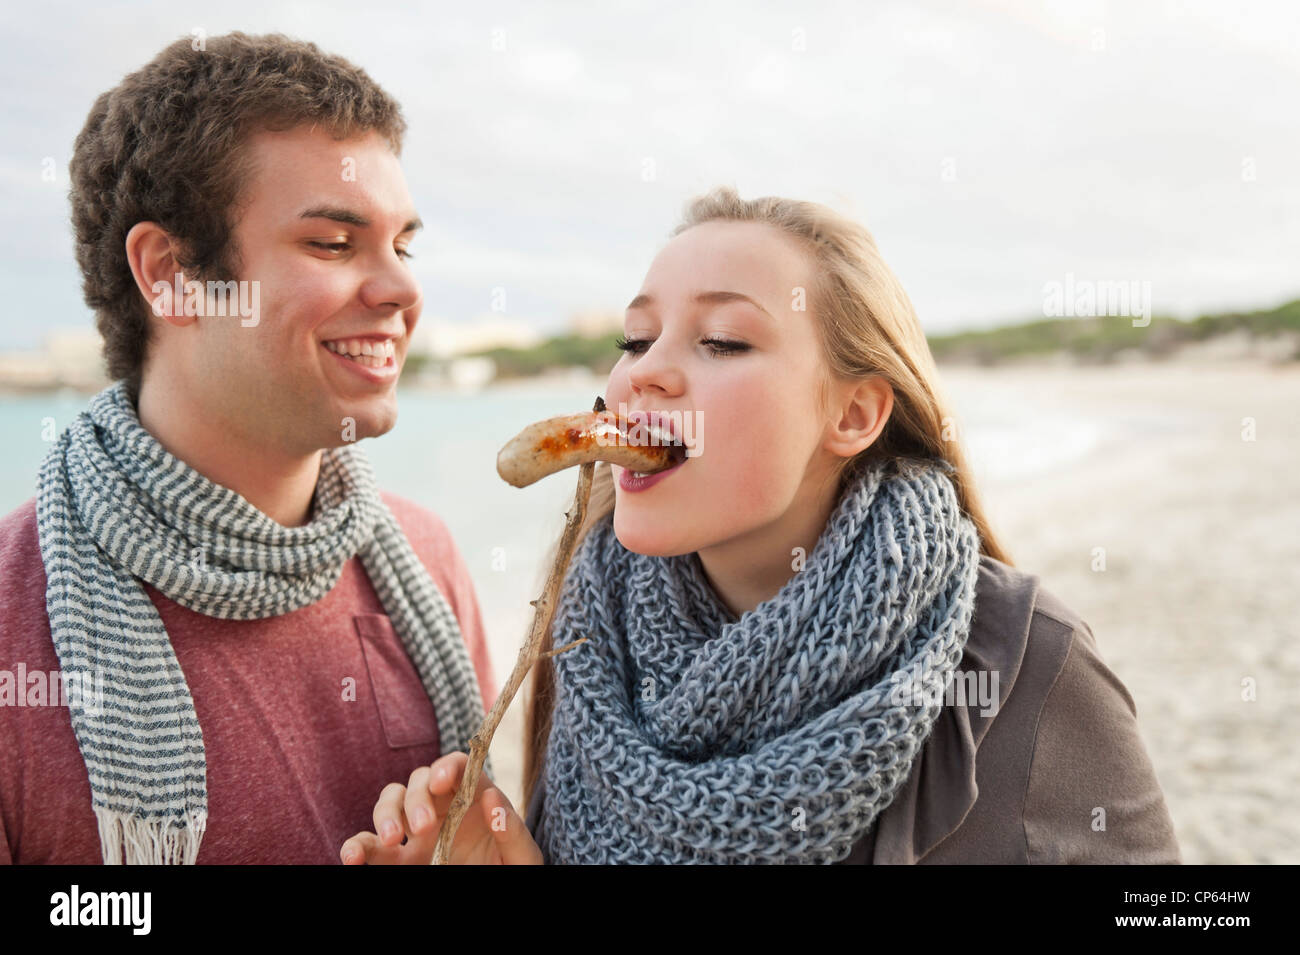 Spain, Mallorca, Young man feeding grilled sausage to teenage girl Stock Photo